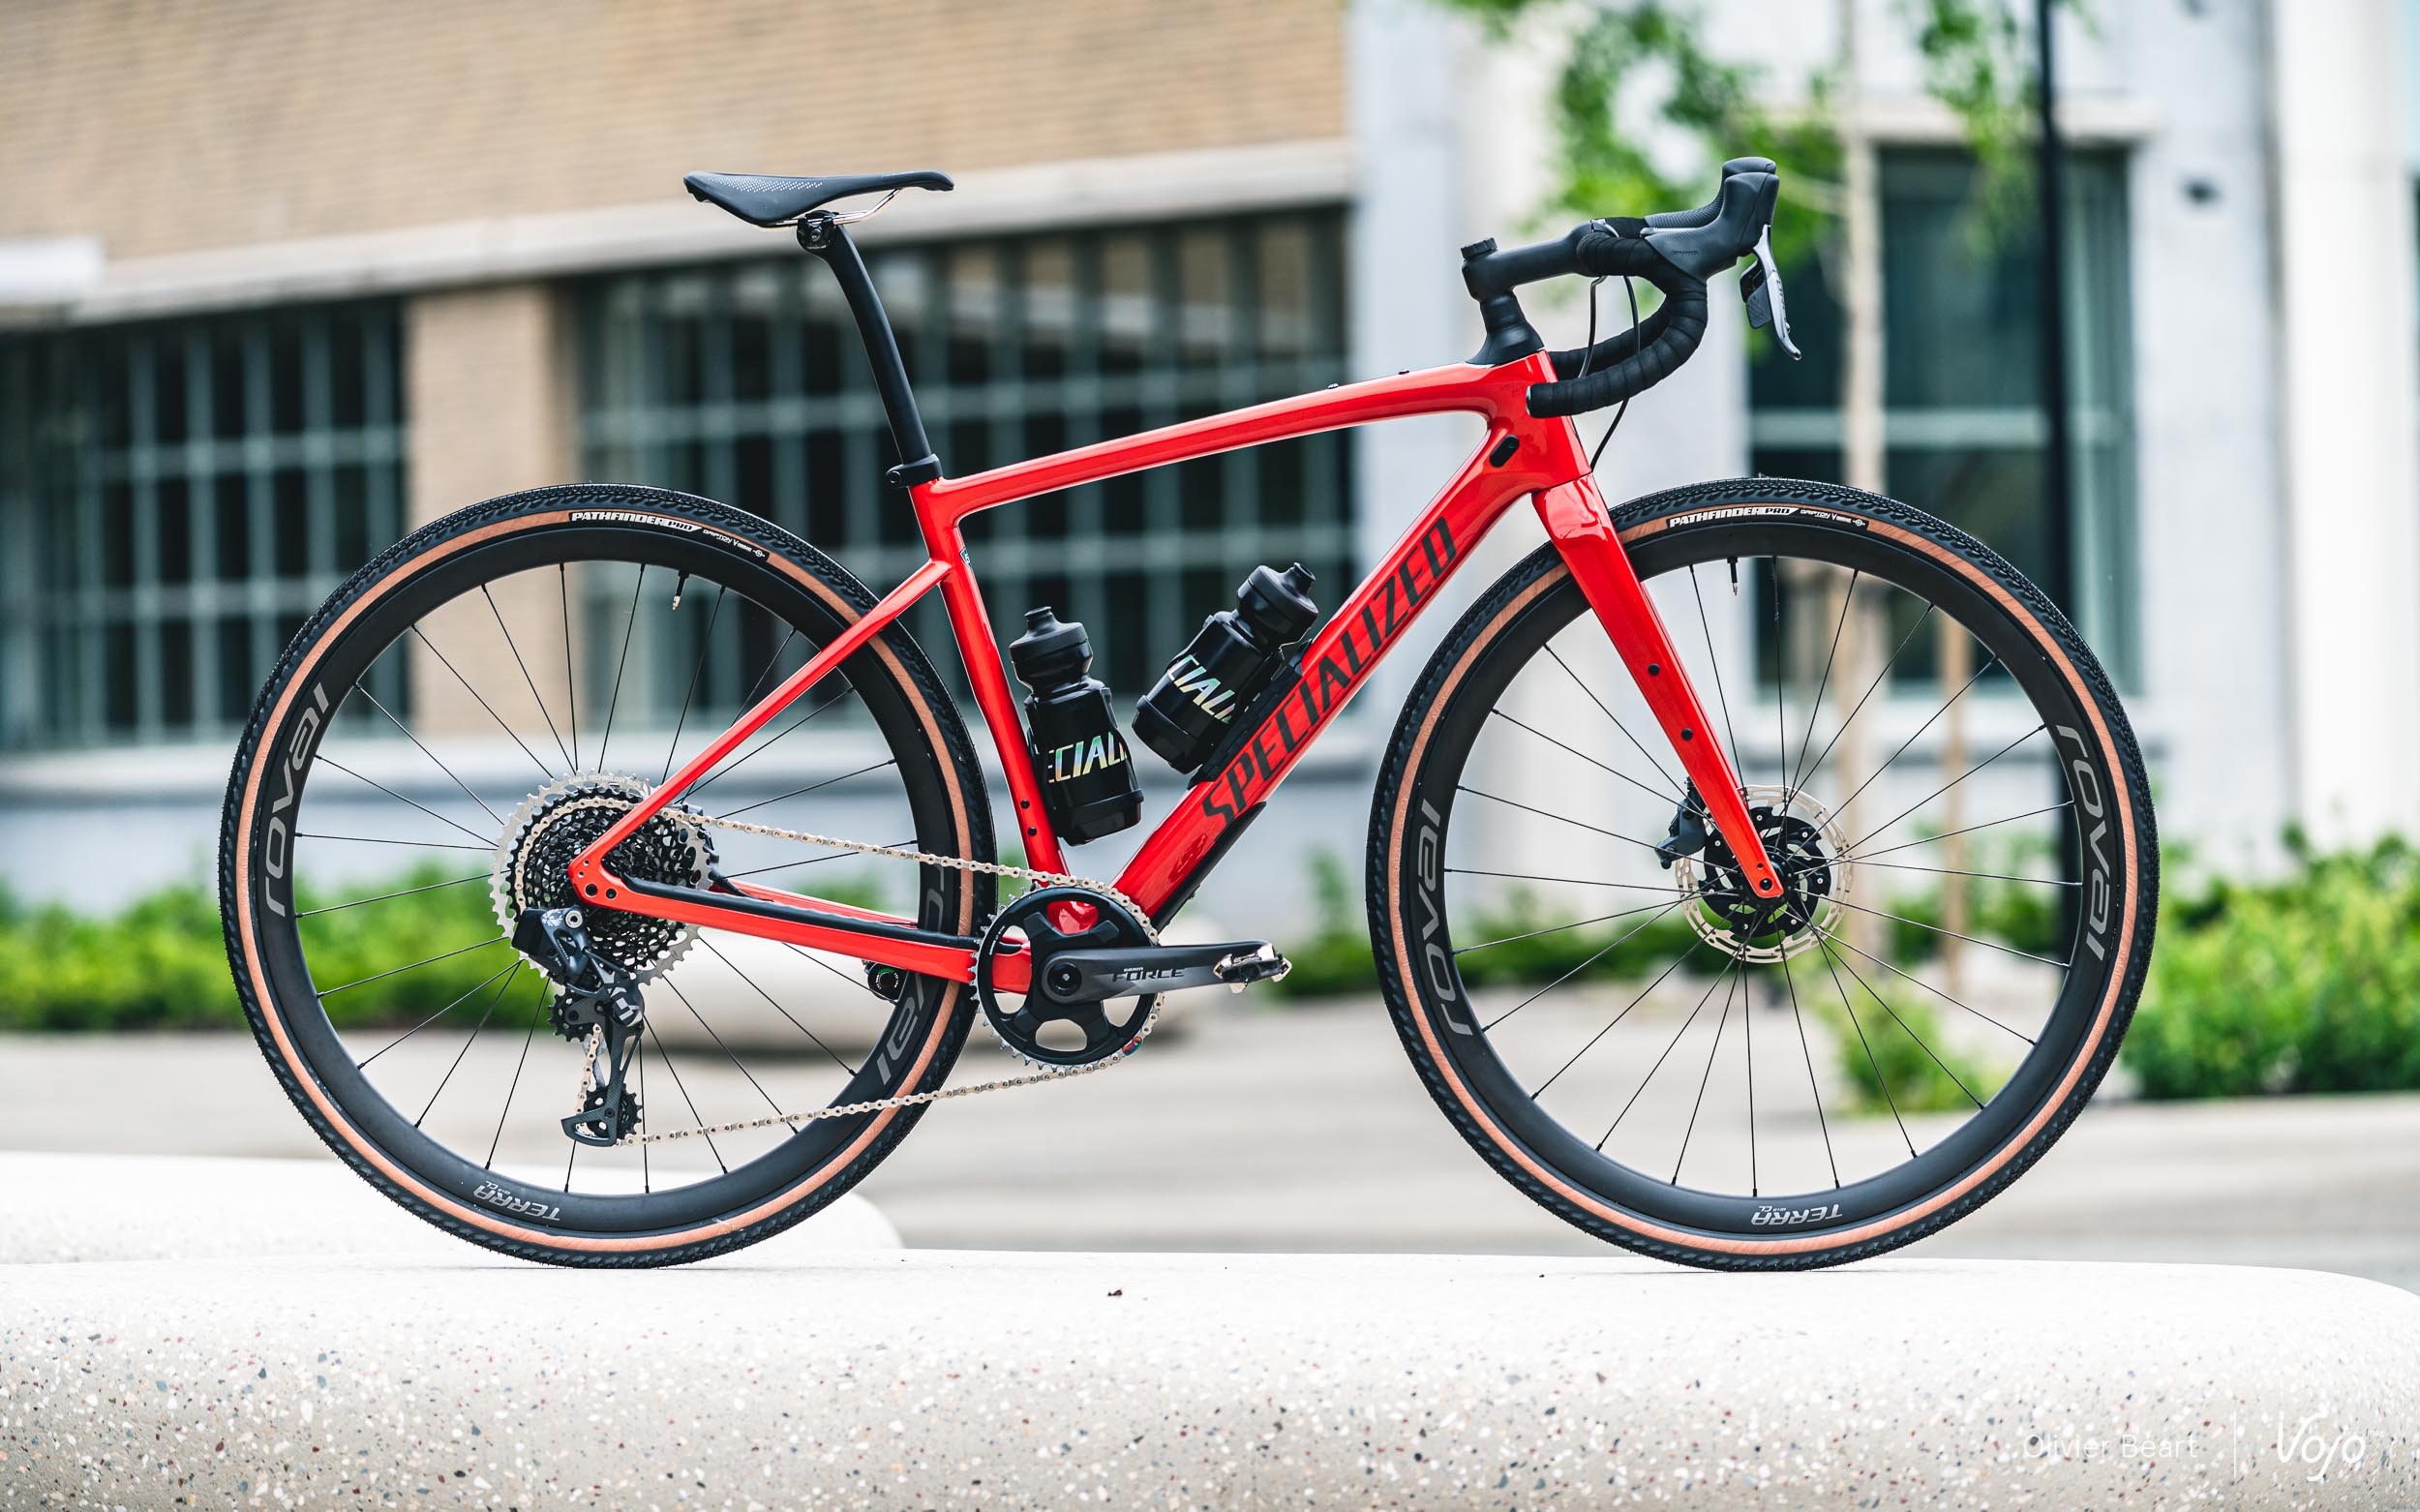 Specialized Gravel bikes for sale